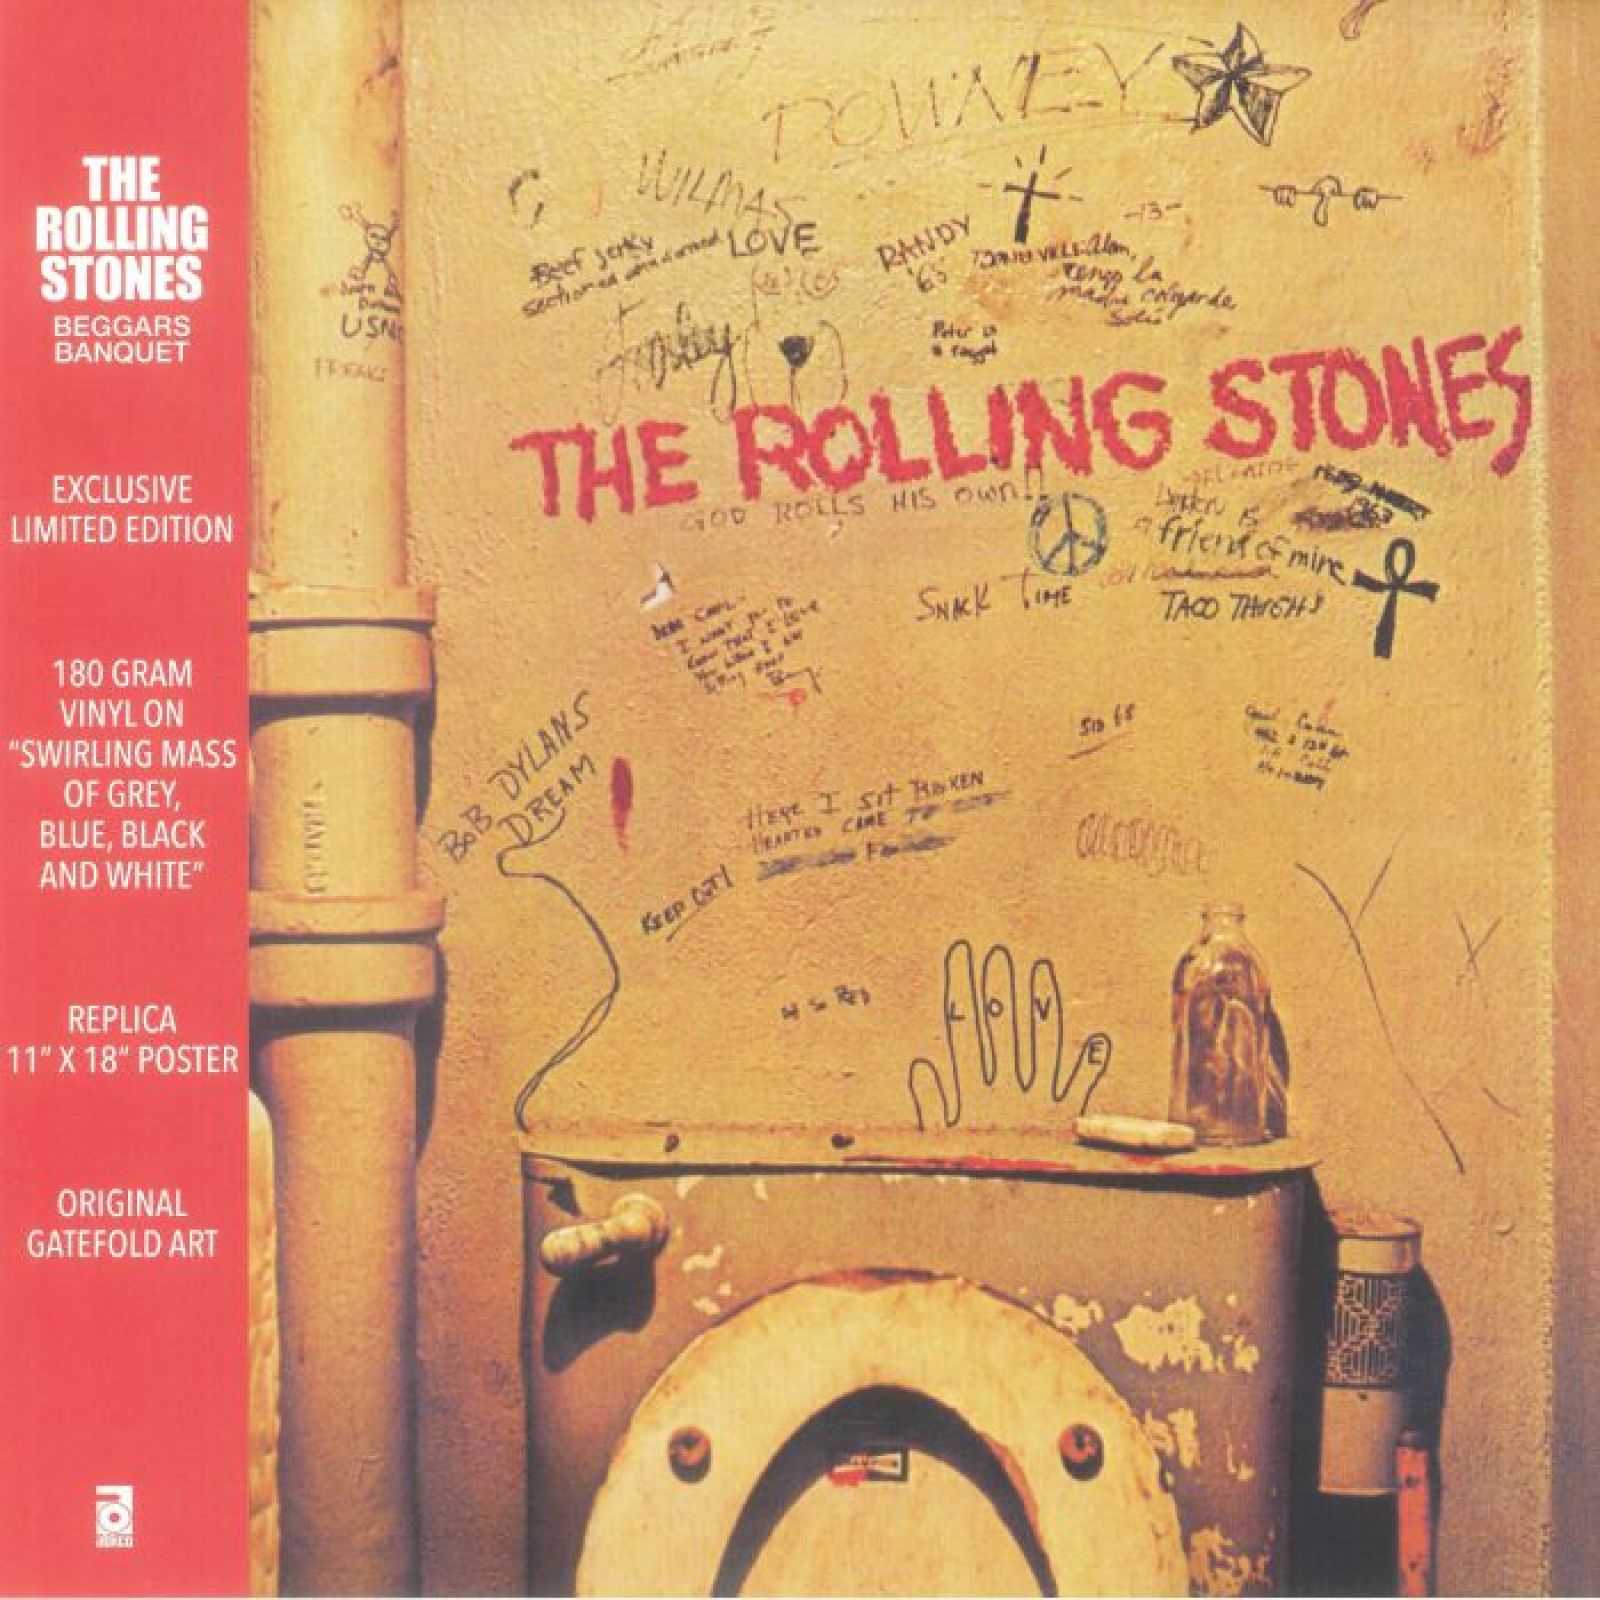 Виниловая пластинка Rolling Stones, The, Beggars Banquet (Coloured) (0018771214519) виниловая пластинка rolling stones the waters muddy live at checkerboard lounge chicago 1981 coloured 0602445429547